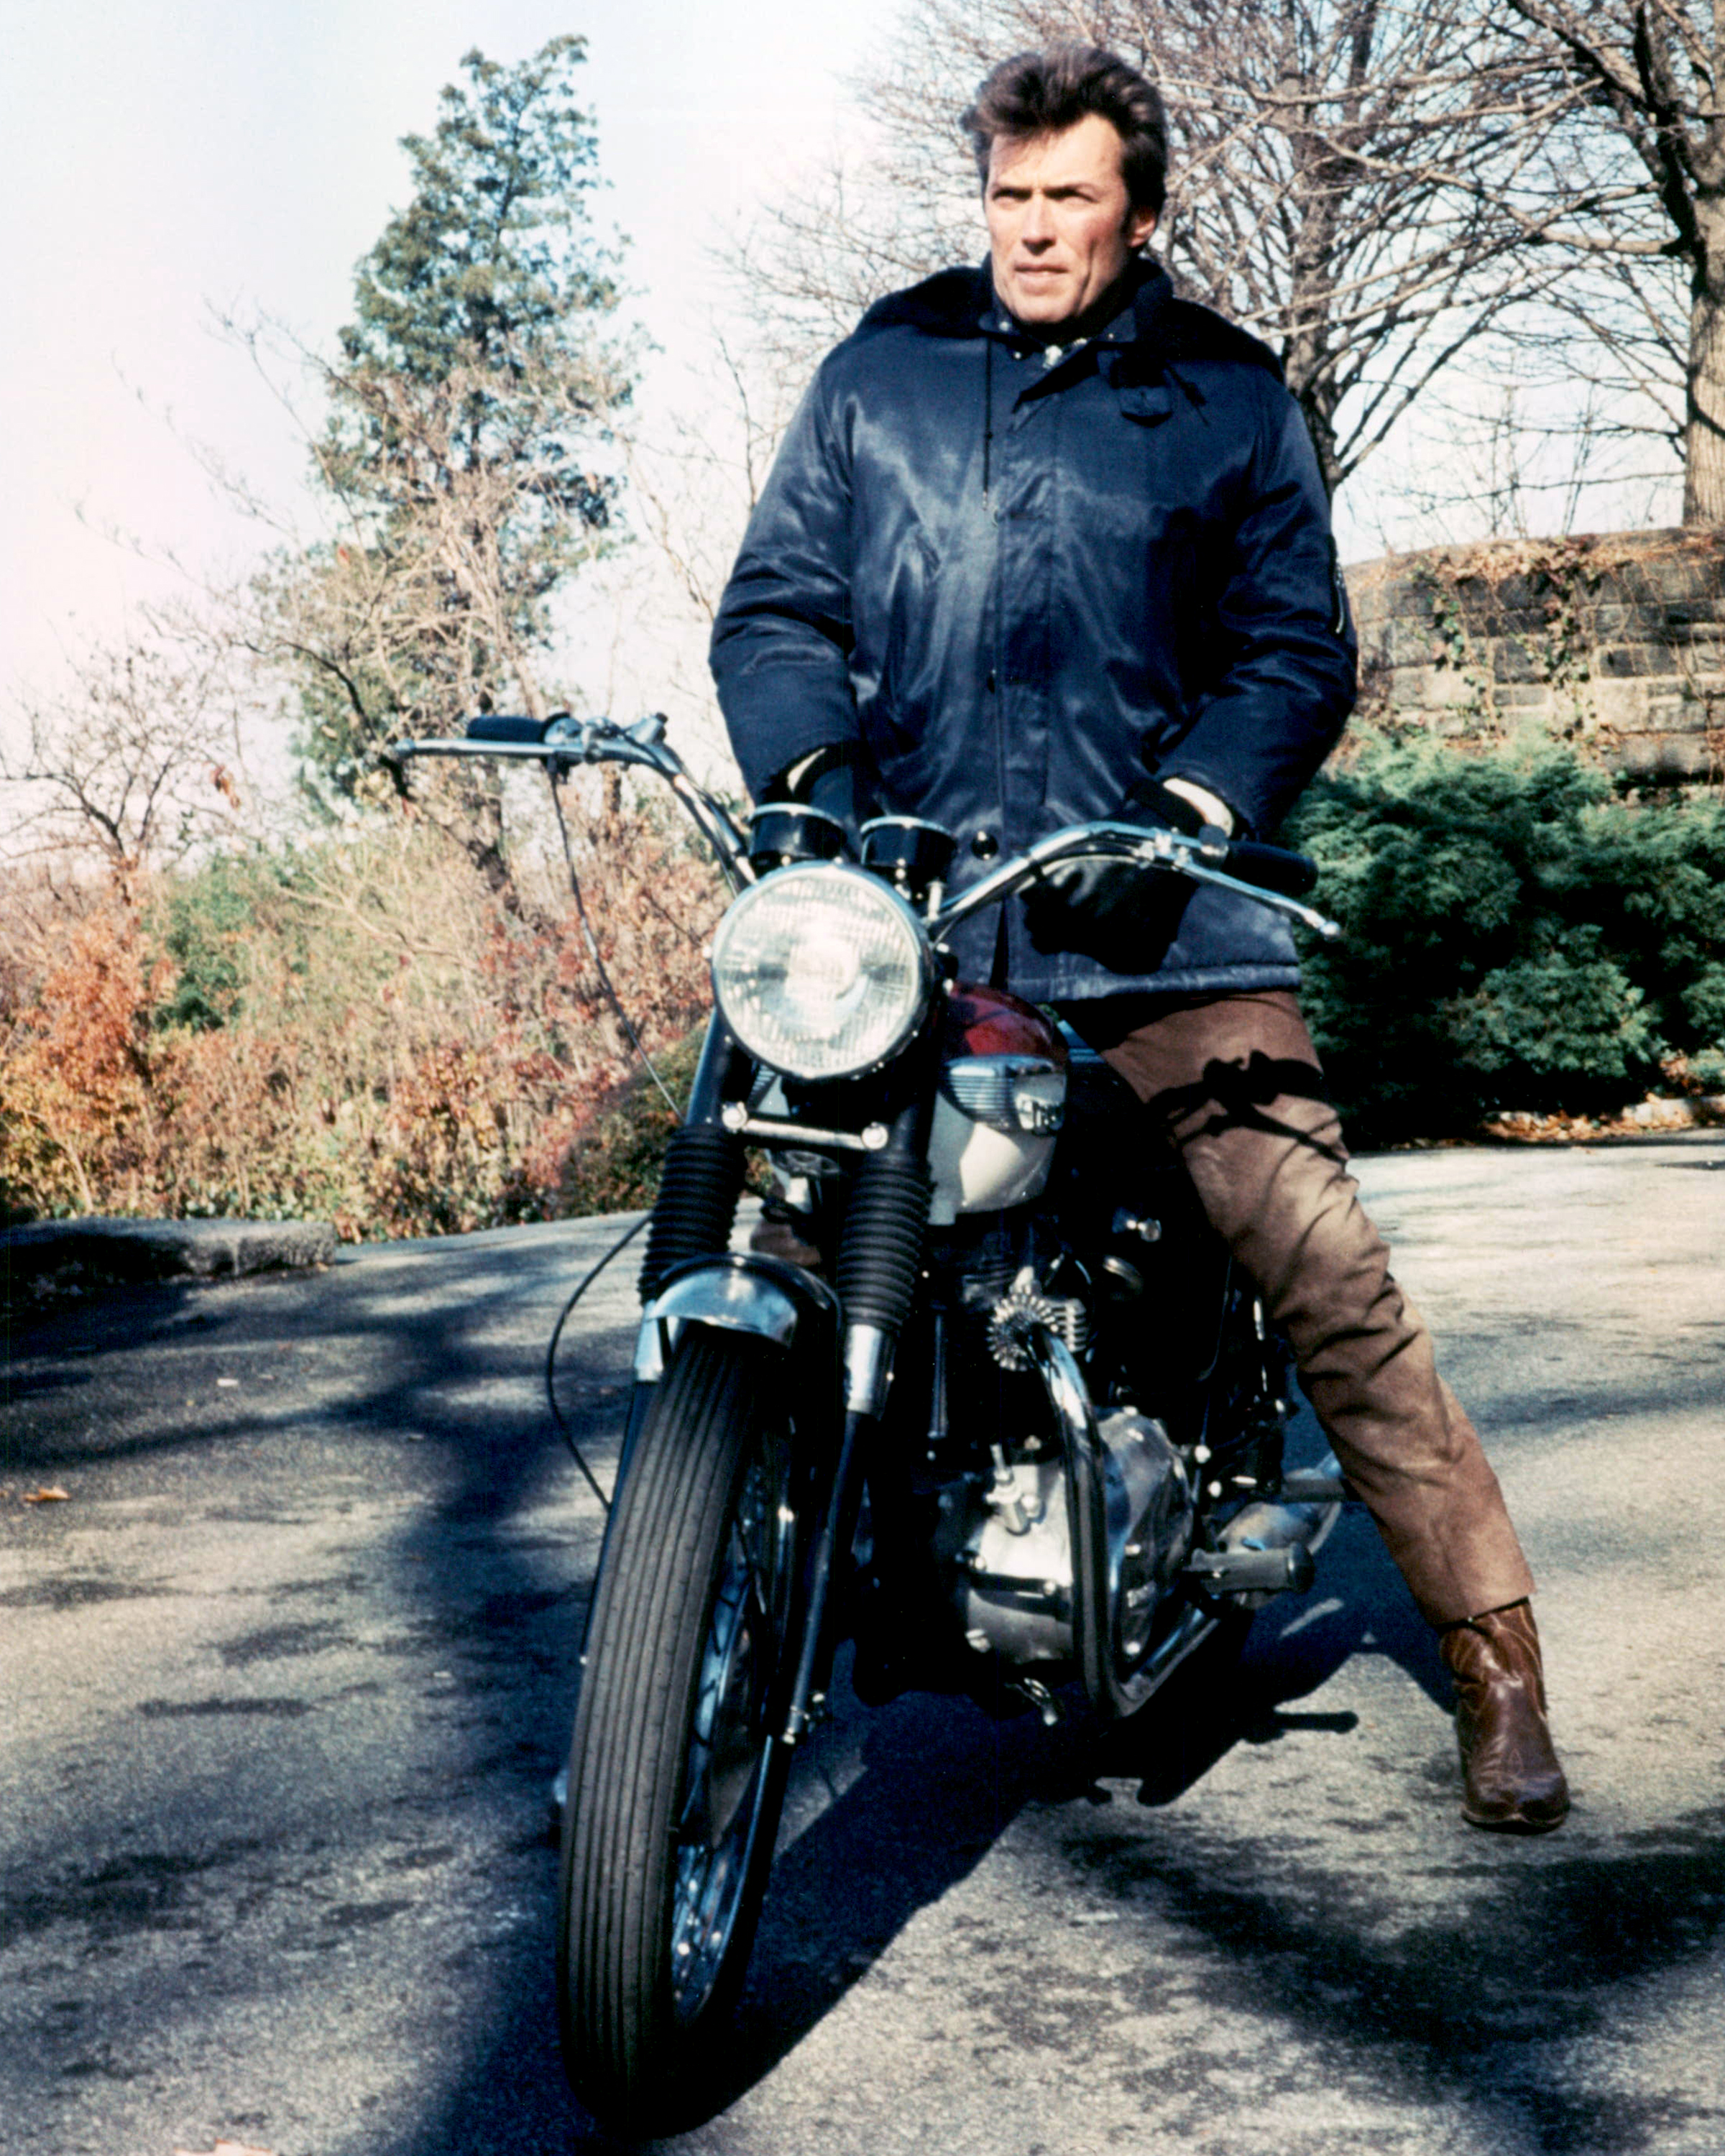 Still of Clint Eastwood in Coogan's Bluff (1968)